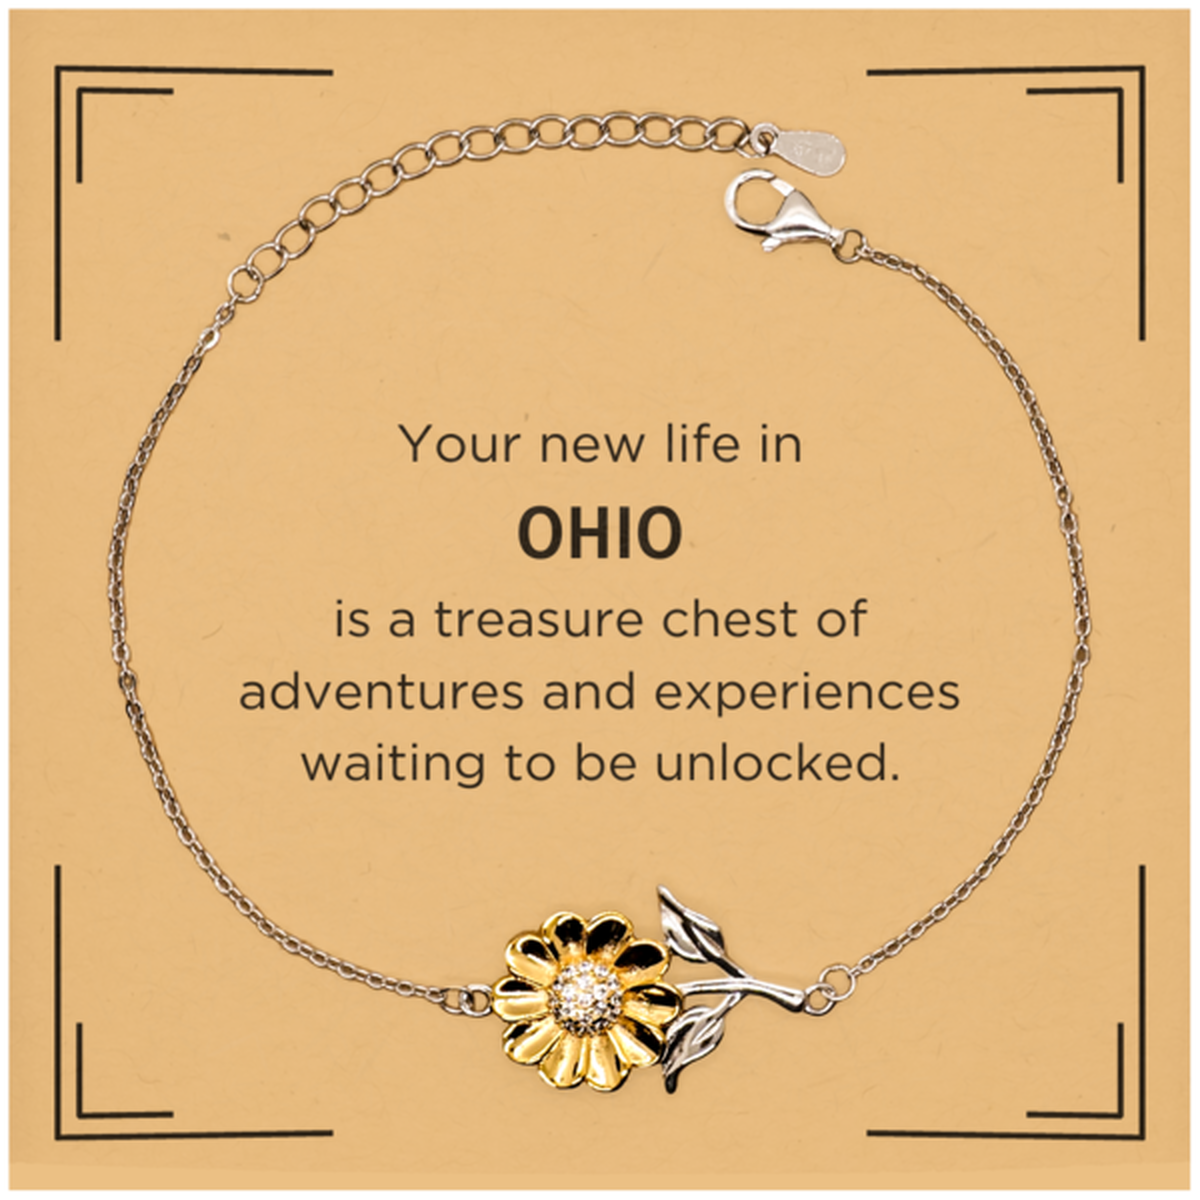 Moving to Ohio Gifts, Your new life in Ohio, Long Distance Ohio Christmas Sunflower Bracelet For Men, Women, Friends, Coworkers